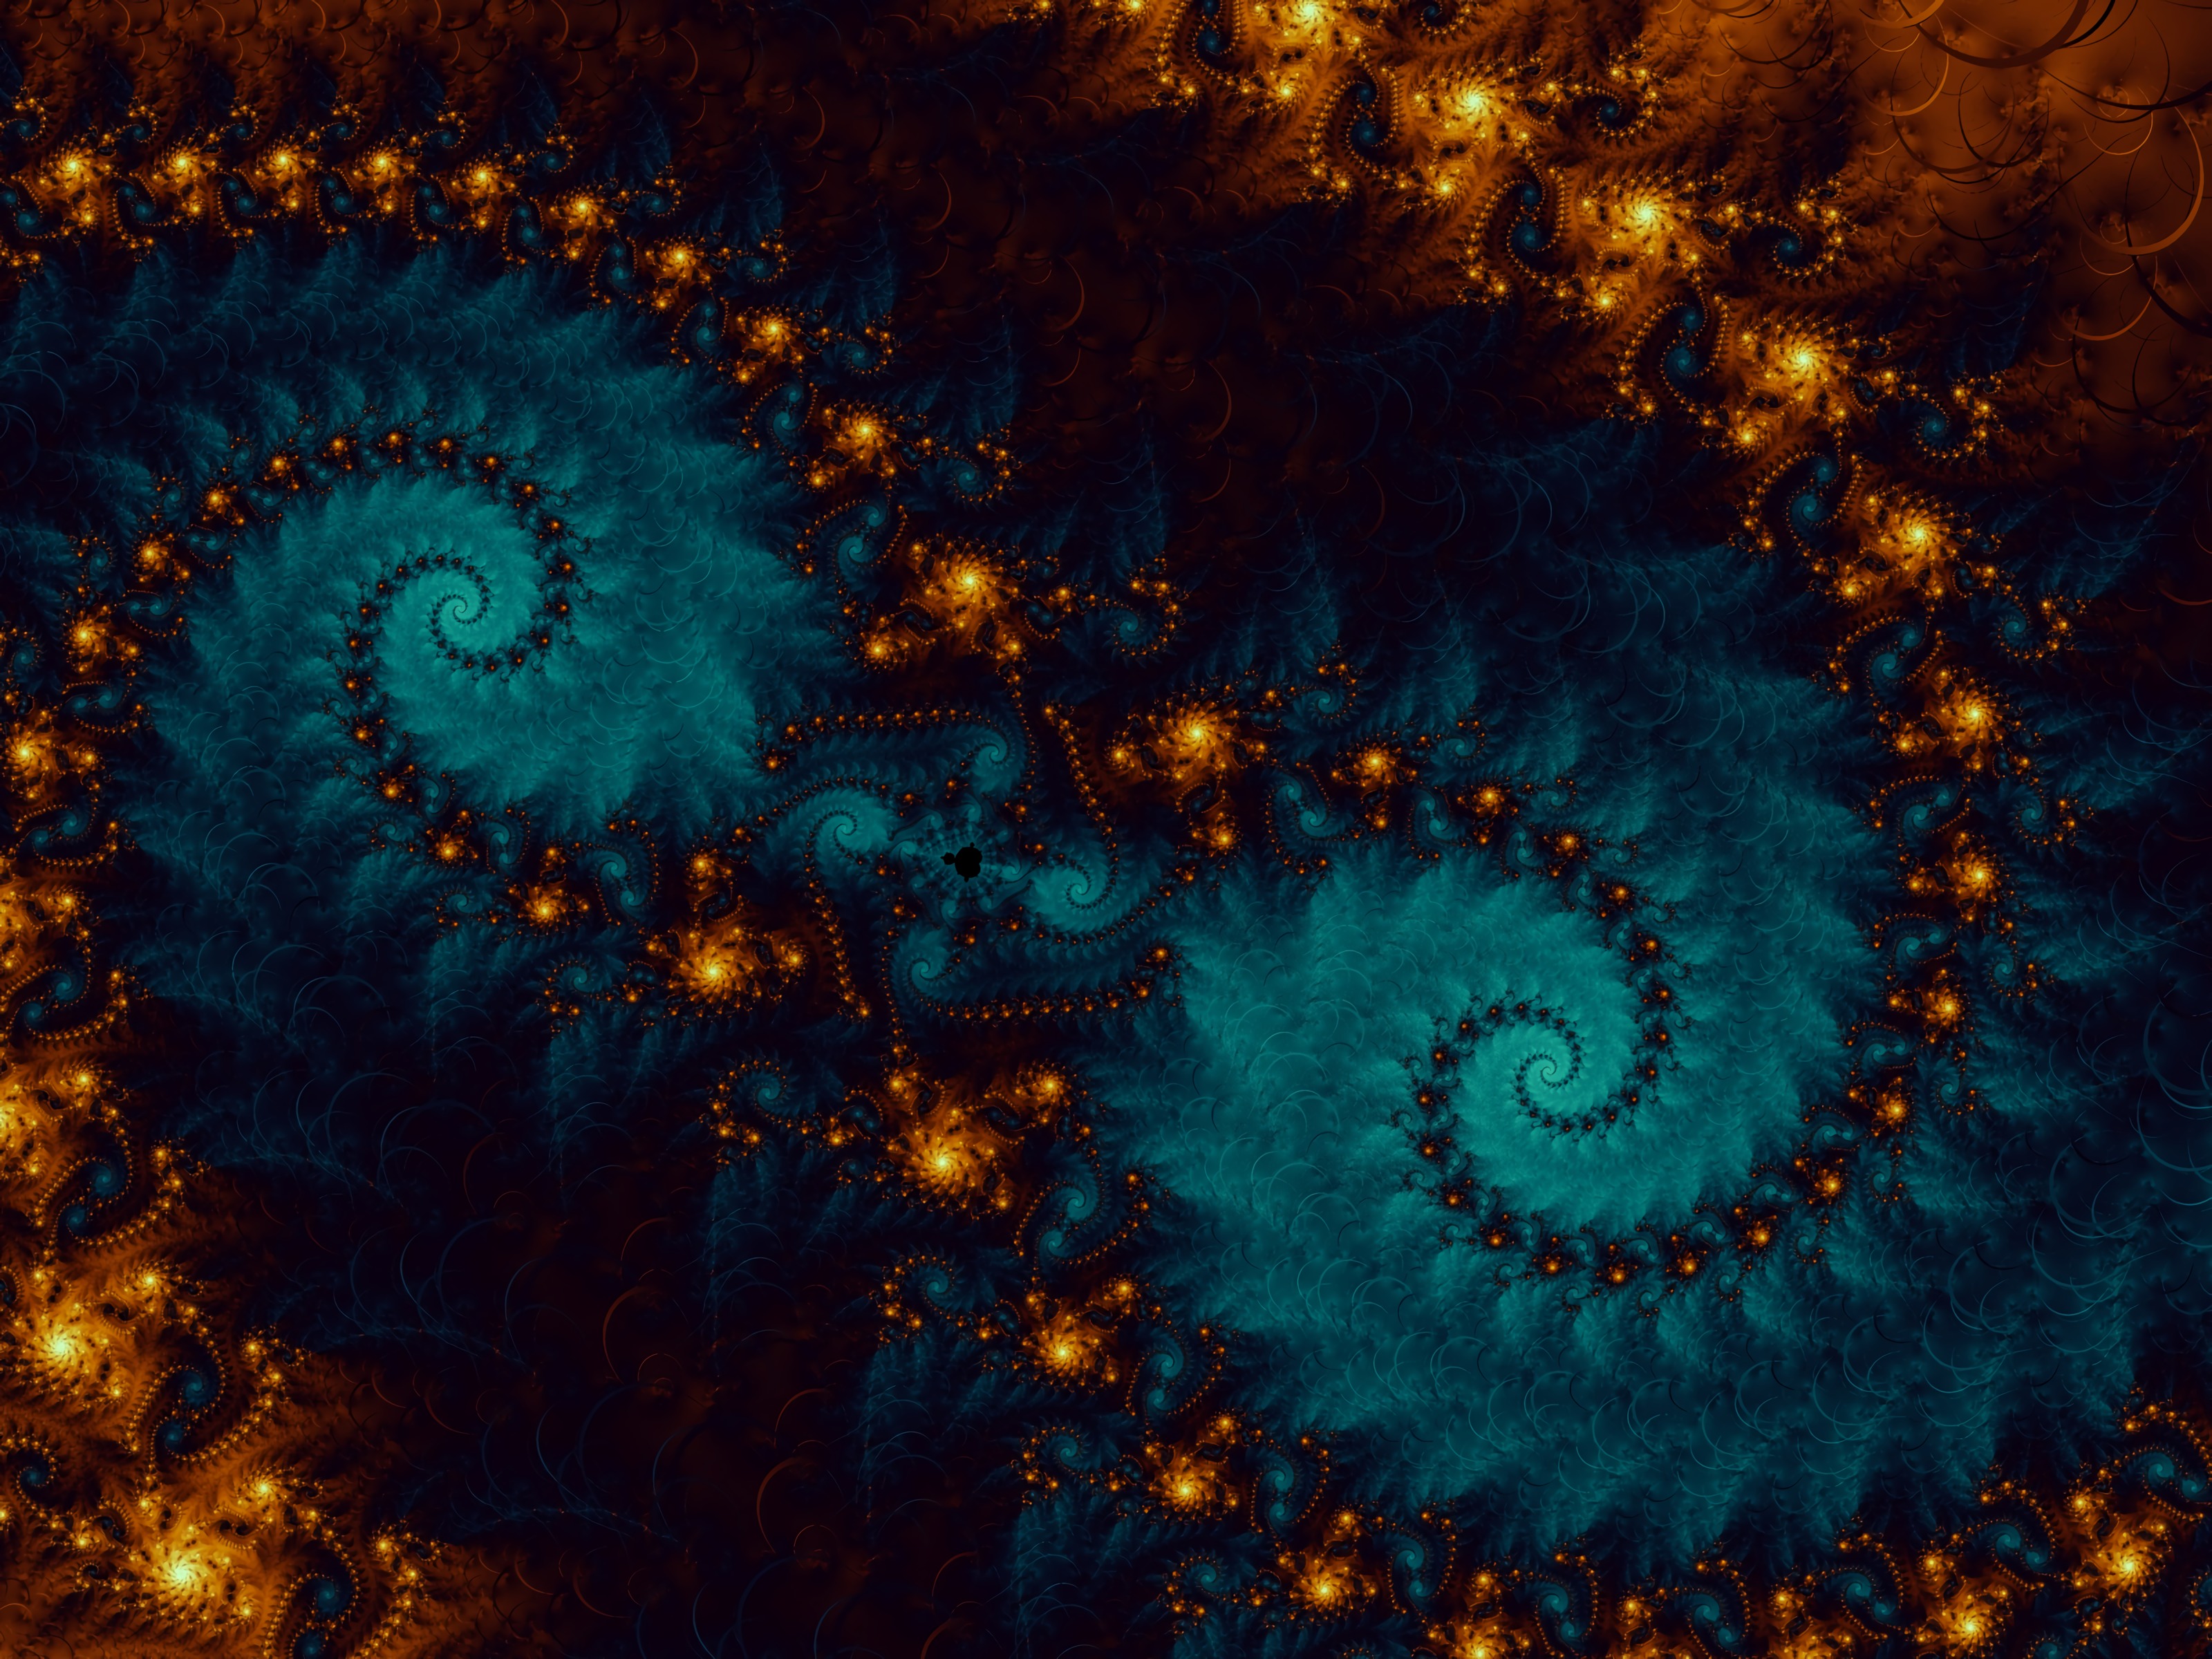 fractal, abstract, pattern, spiral, swirling, involute 5K